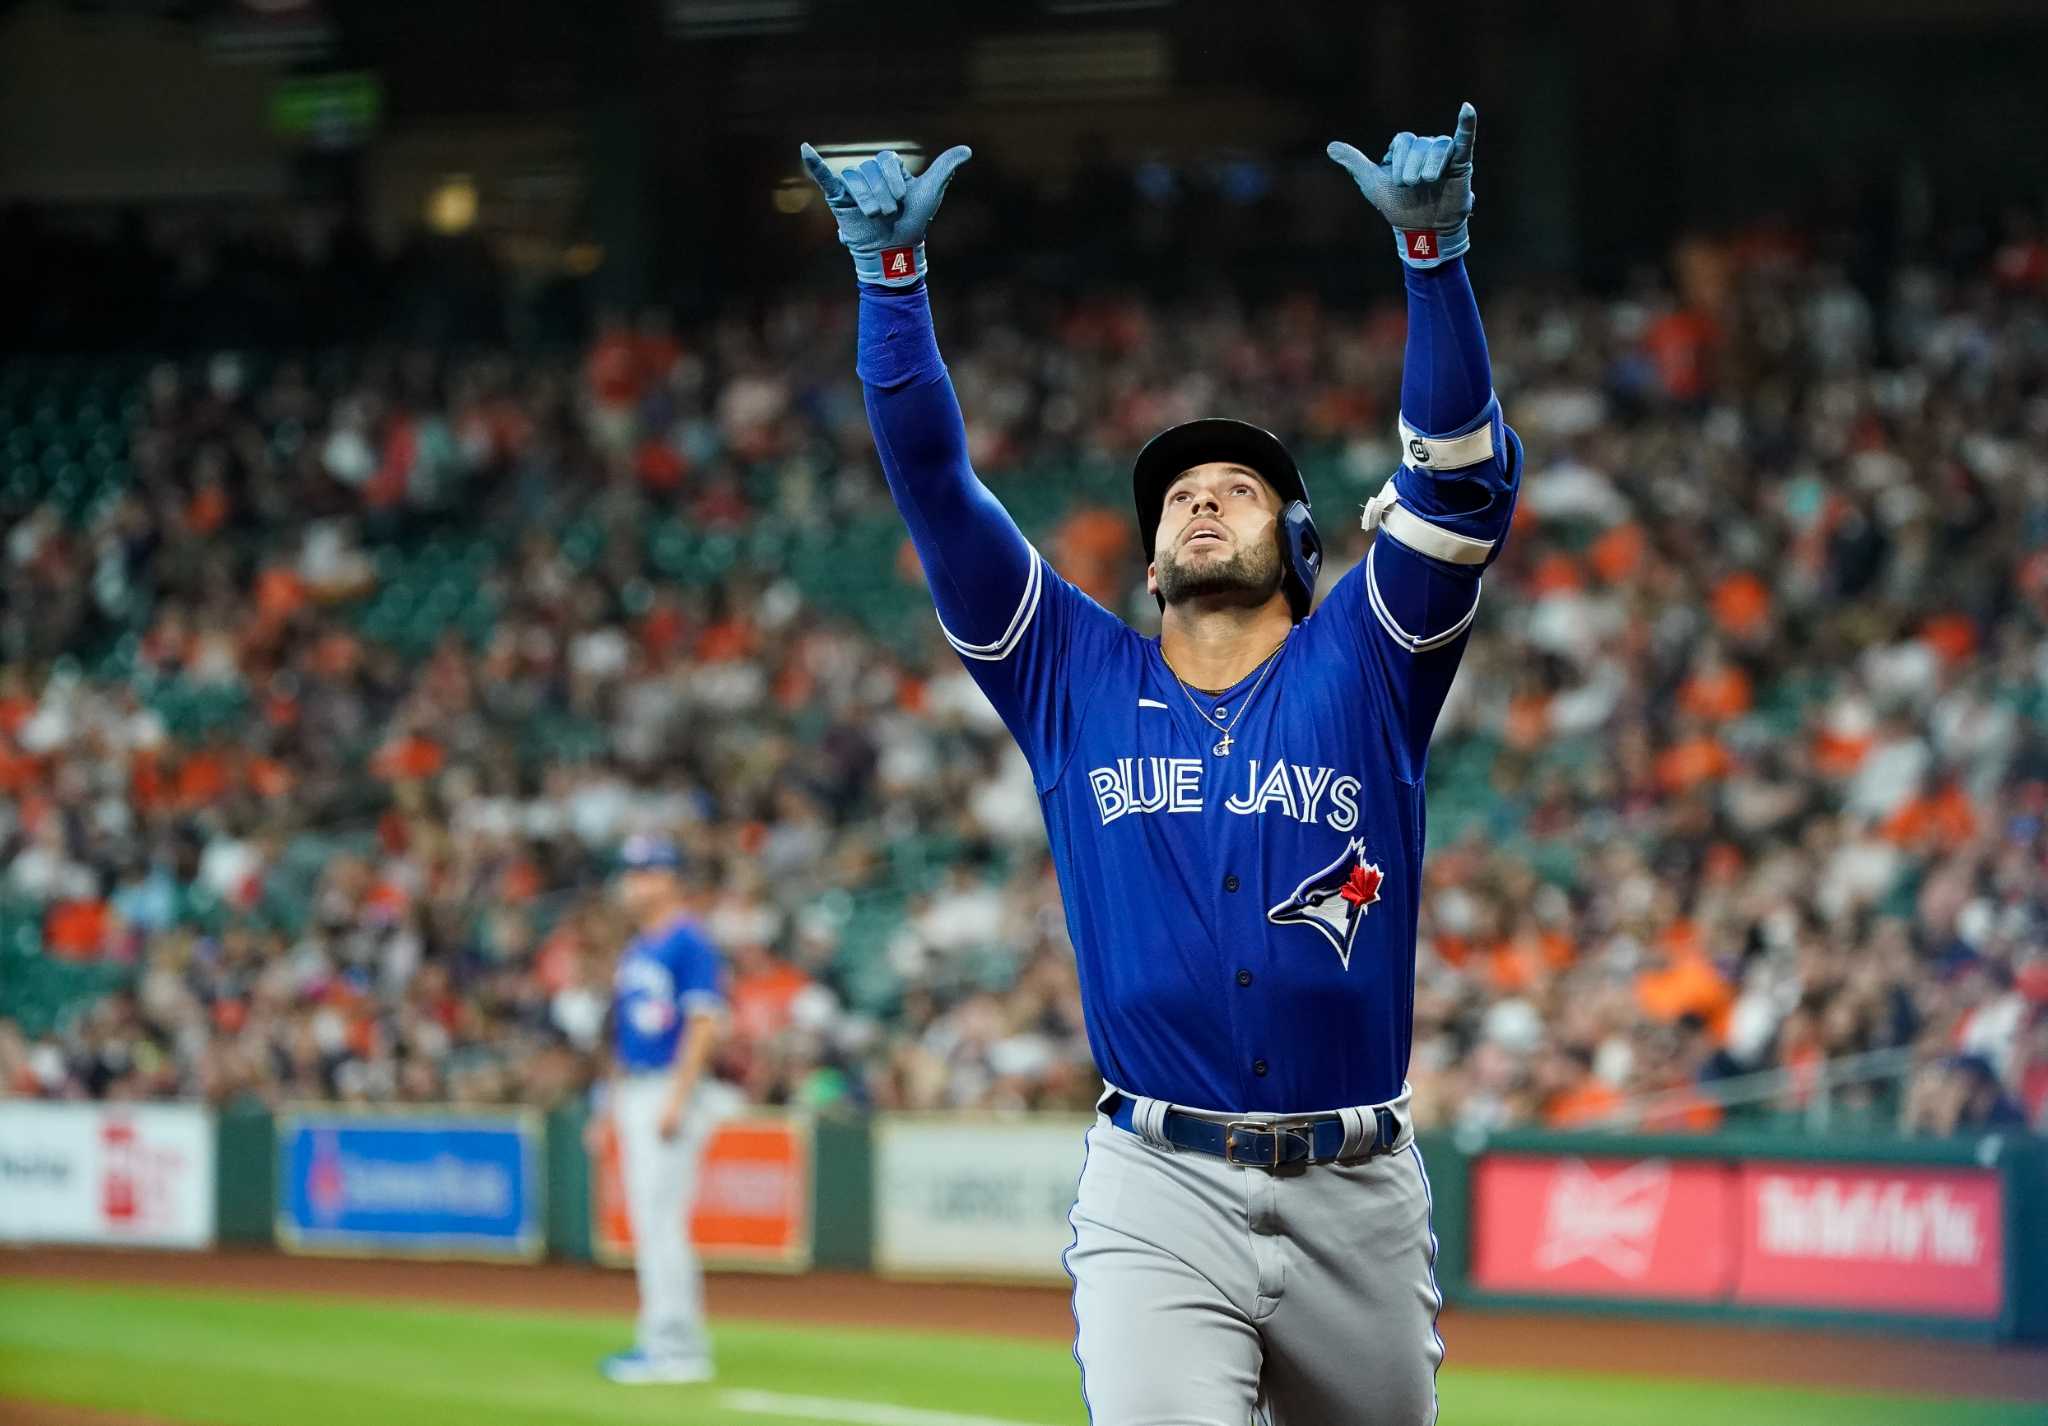 George Springer home run lifts Blue Jays to win vs. Red Sox